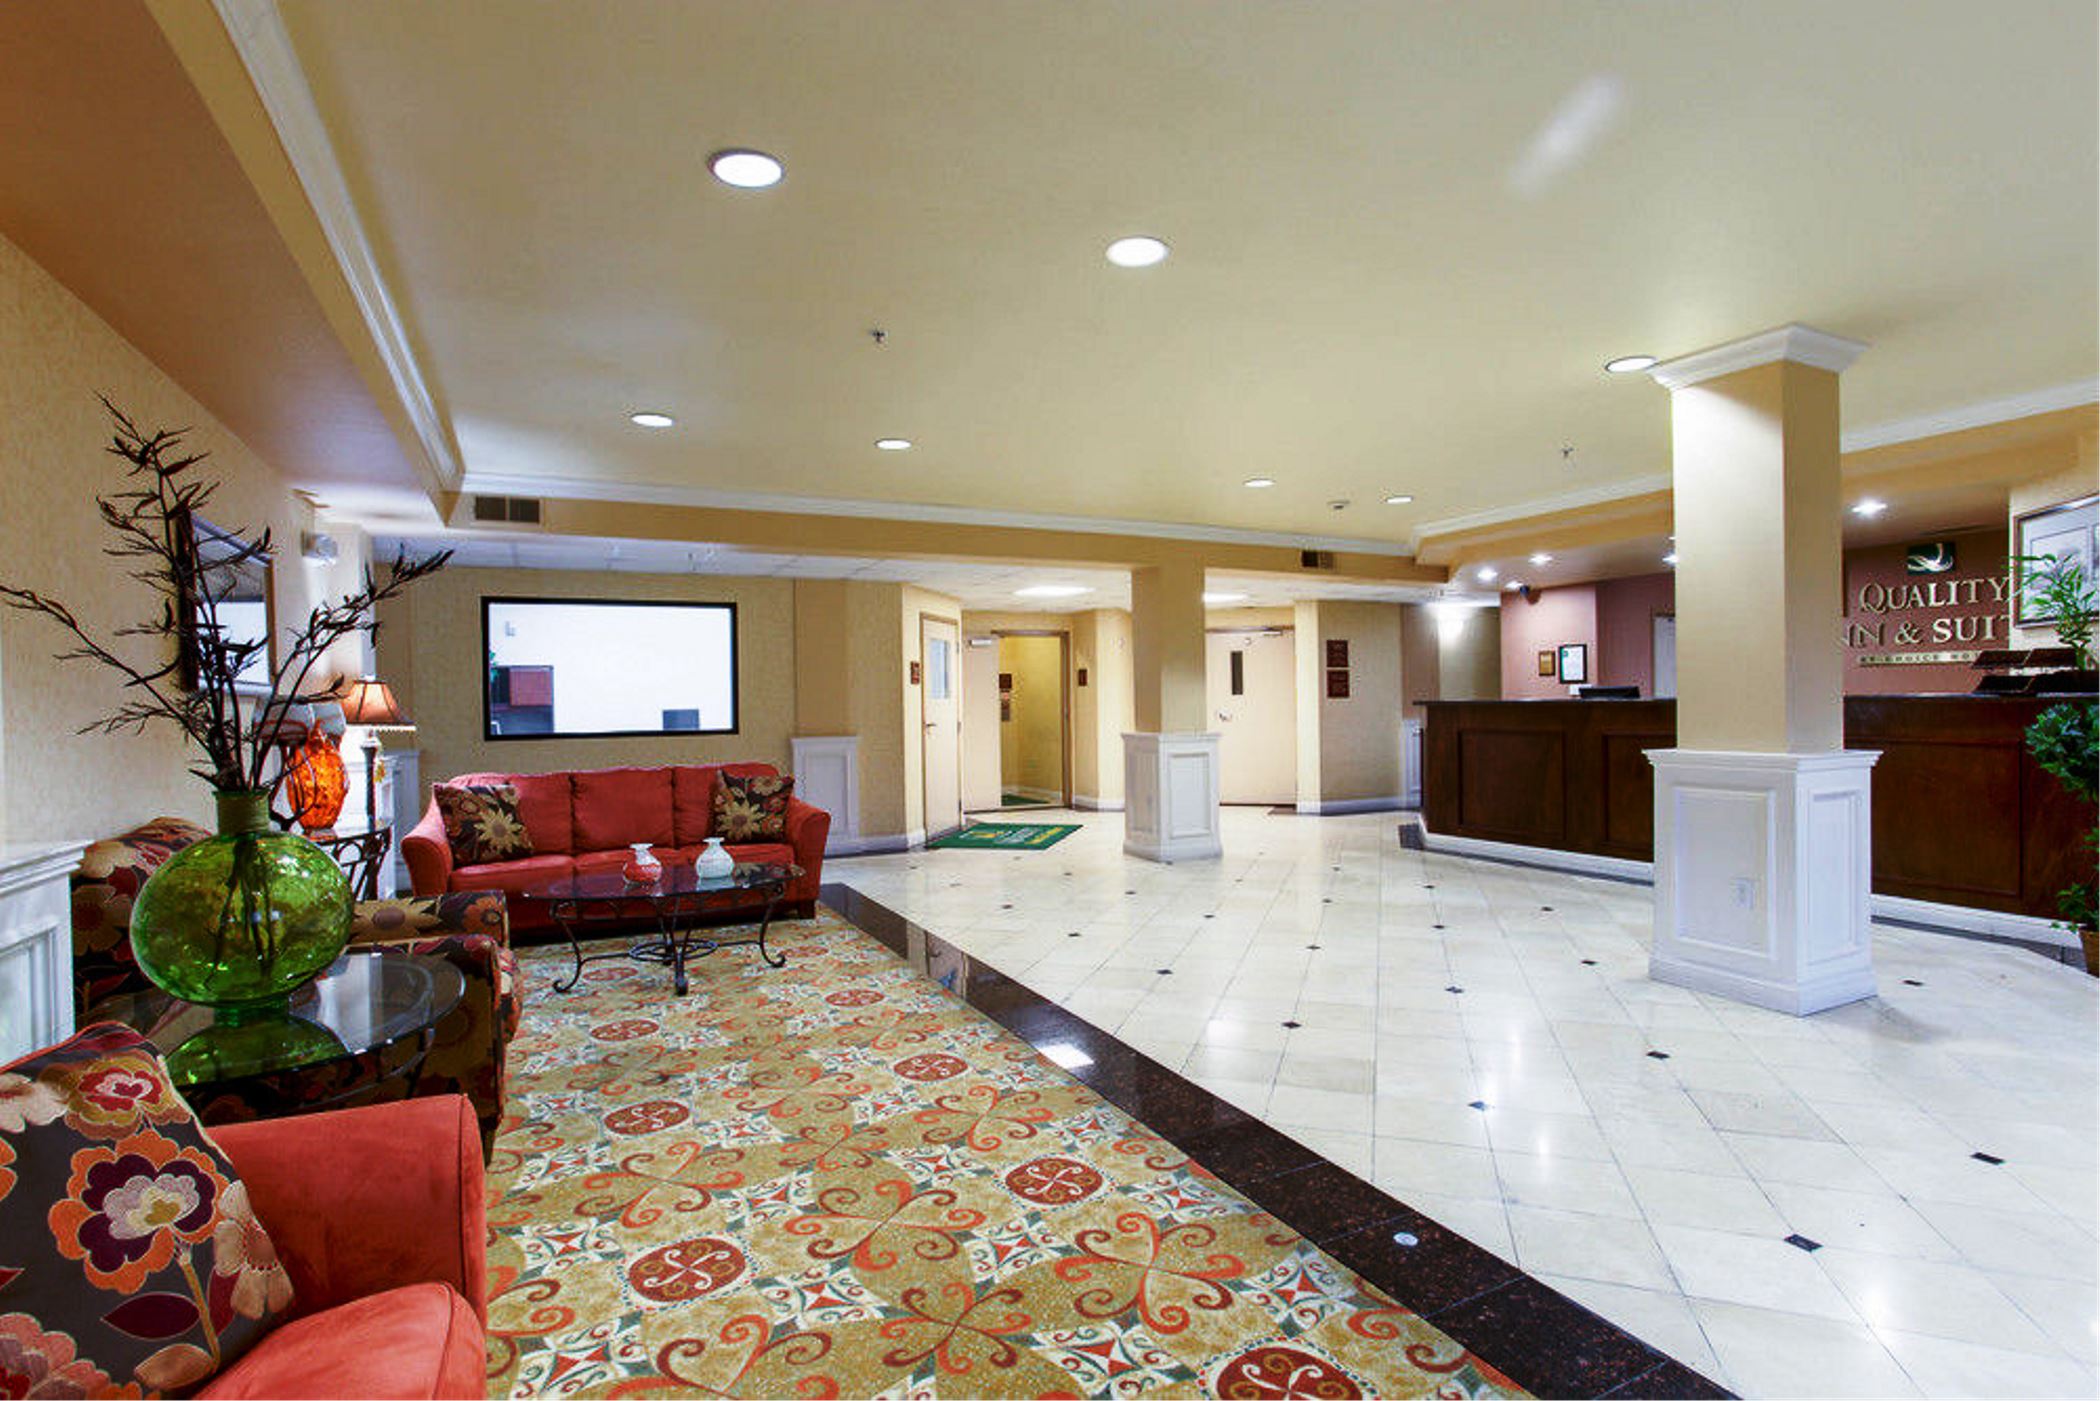 Holiday Inn Express & Suites Mountain View Silicon Valley, an IHG Hotel